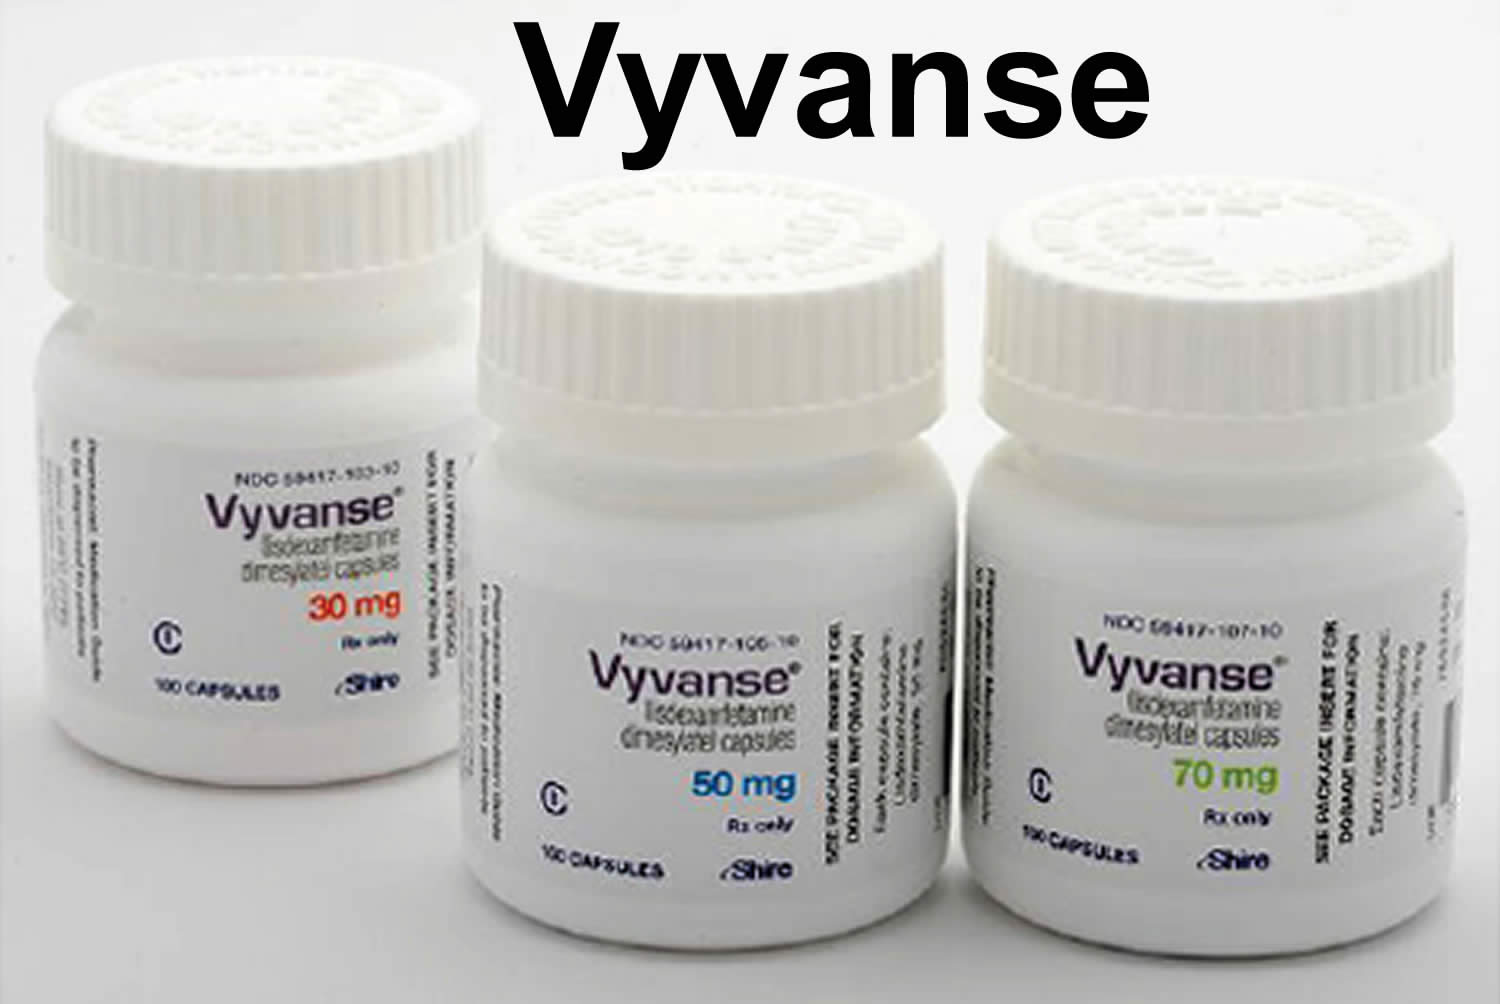 vyvanse-uses-for-adhd-binge-eating-vyvanse-dosage-and-side-effects